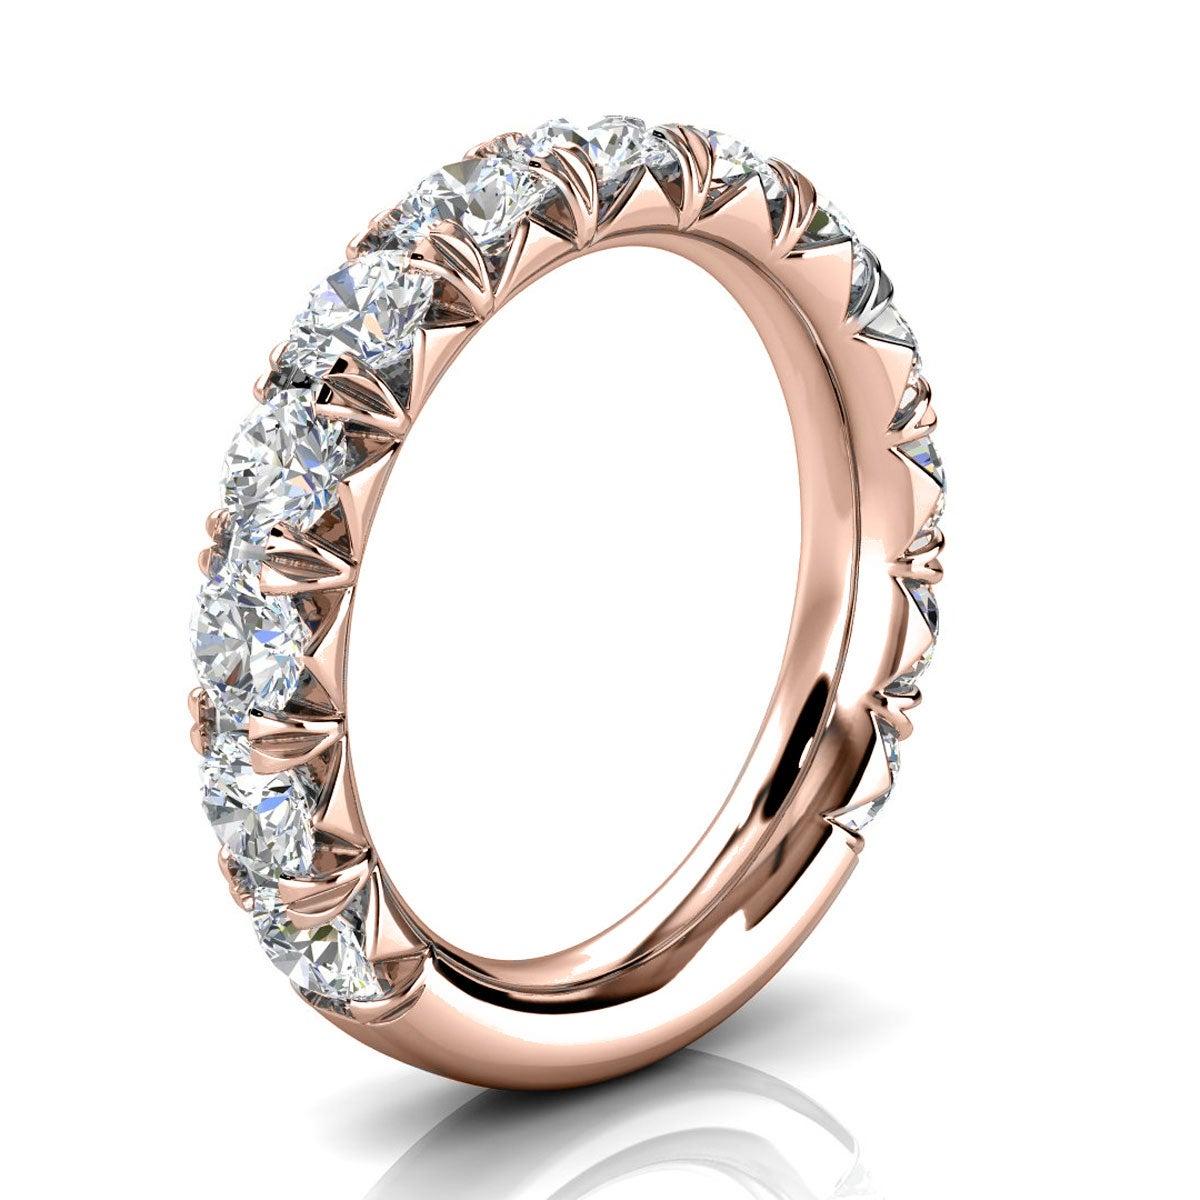 For Sale:  18K Rose Gold Gia French Pave Diamond Ring '2 Ct. tw' 2